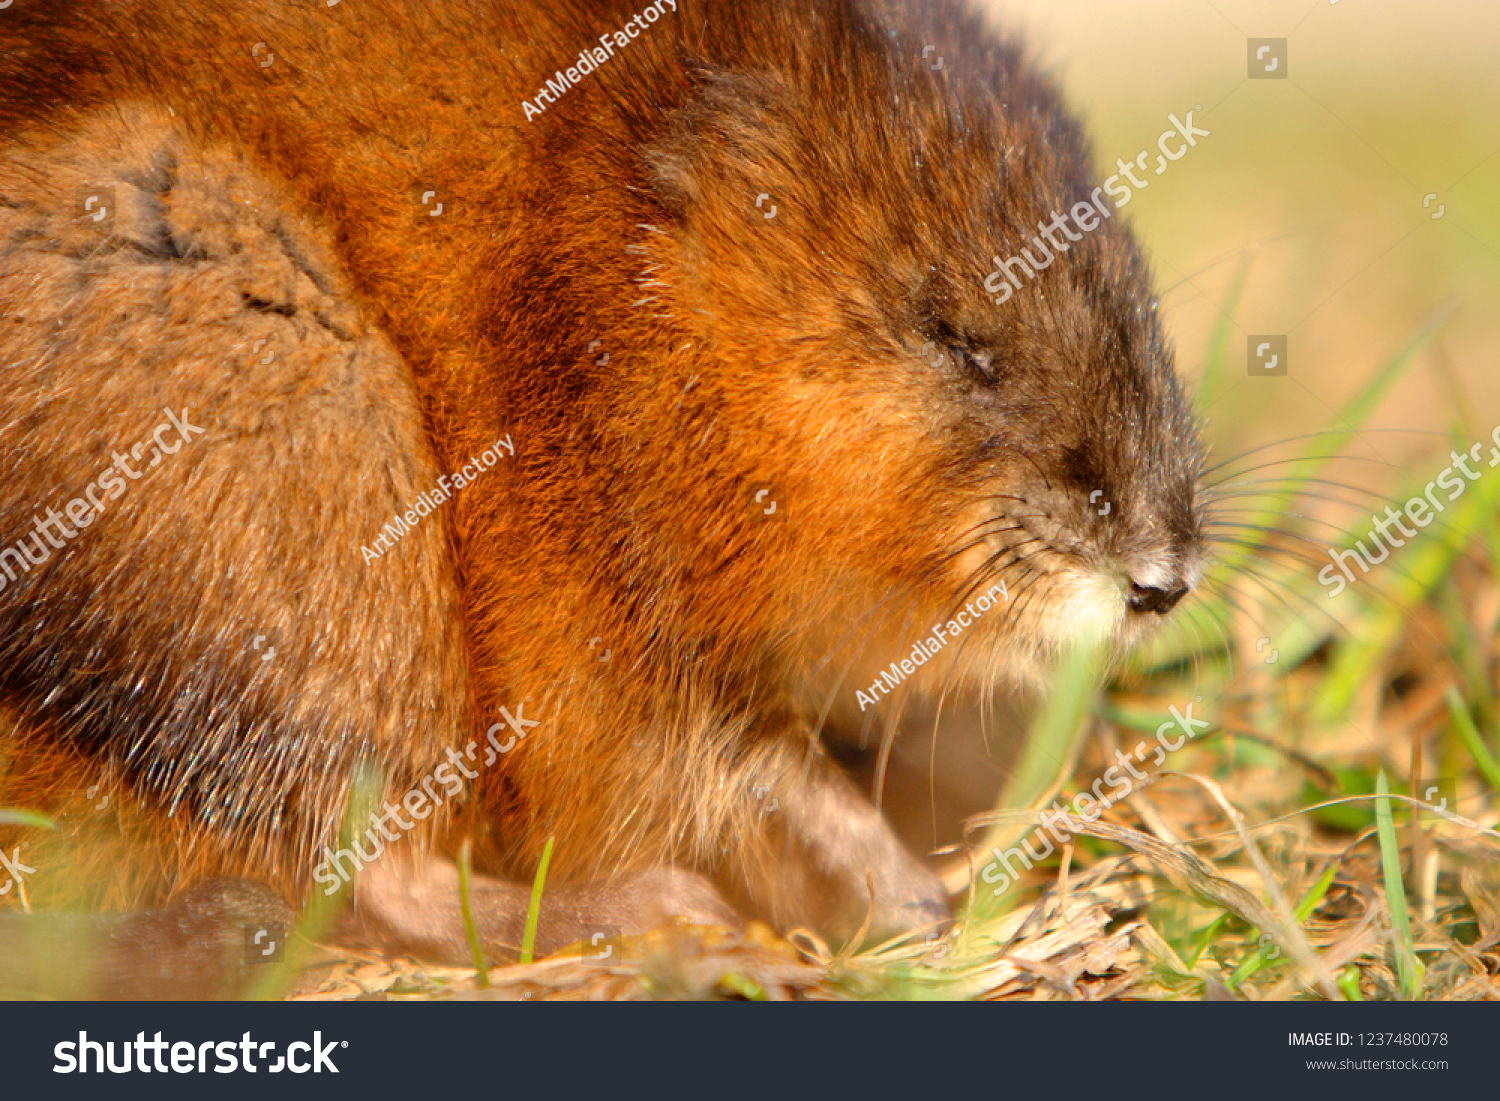 Single Muskrat rodent on a grassy Biebrza river wetlans during the early spring mating period #1237480078